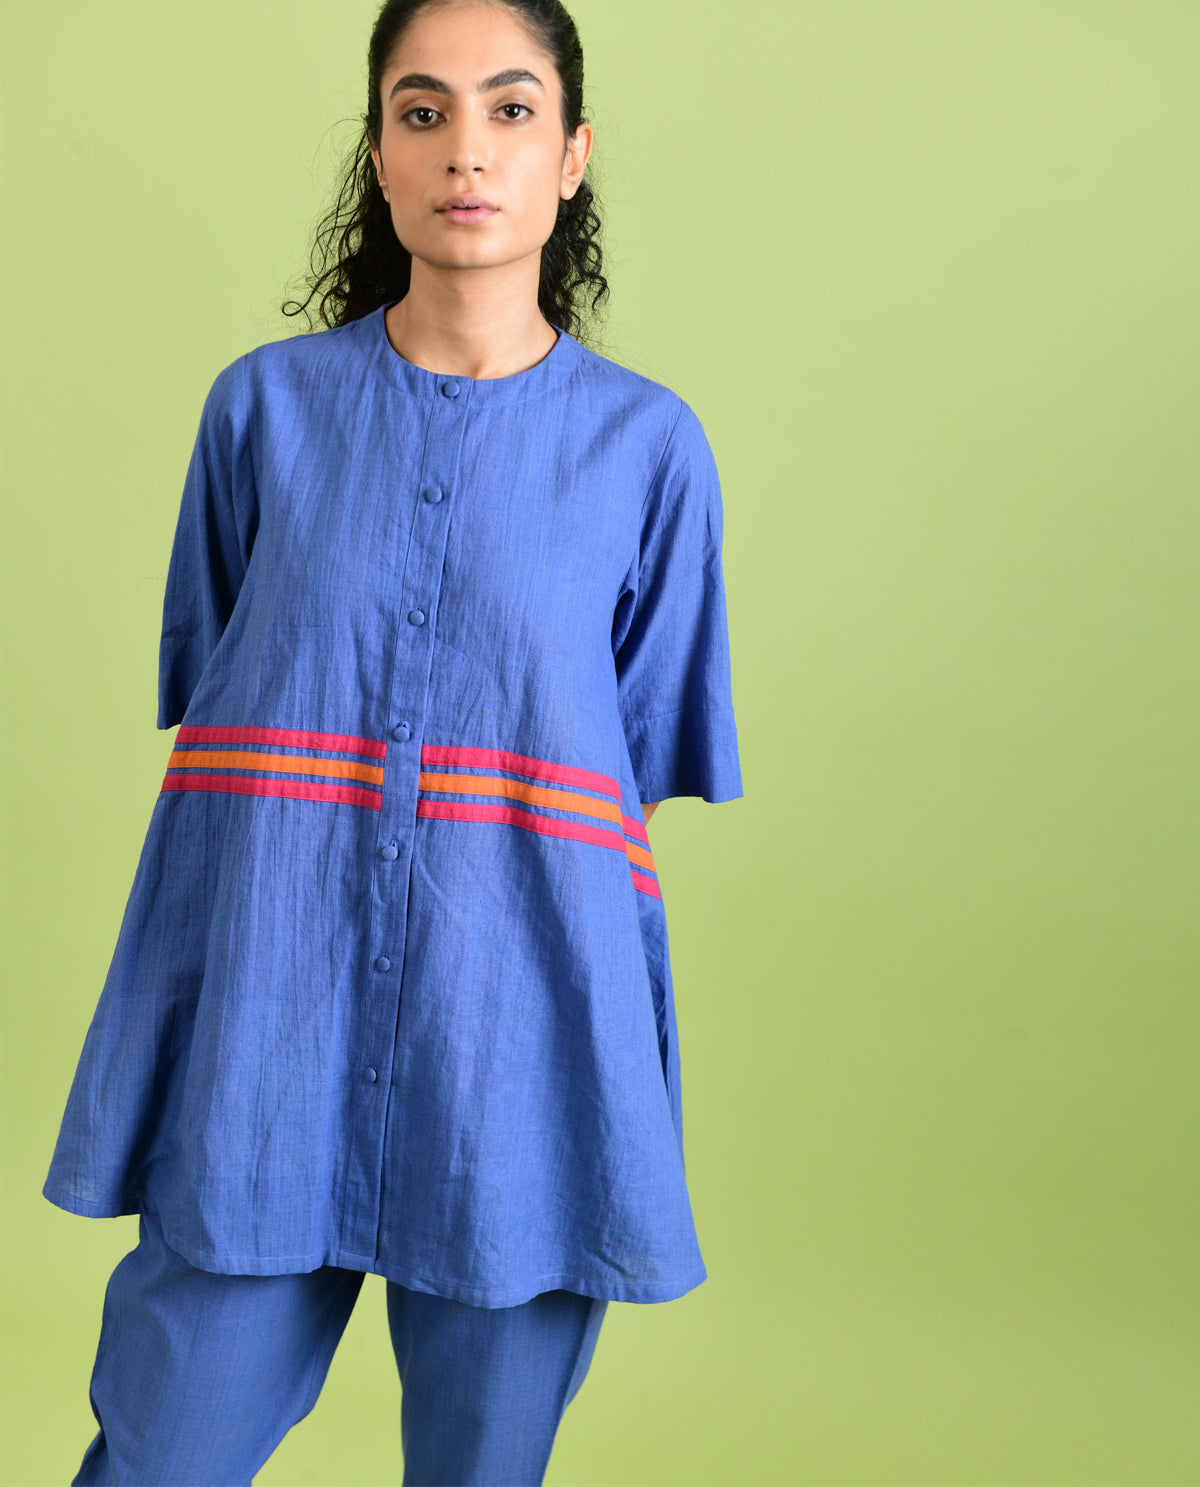 Handloom Cotton Co-ord Set at Kamakhyaa by Rias Jaipur. This item is Best Selling, Casual Wear, Co-ord Sets, For Mother, For Mother W, Handloom Cotton, Handspun, Handwoven, Hue, Office Wear Co-ords, Purple, Regular Fit, Solids, Stripes, Travel, Travel Co-ords, Womenswear